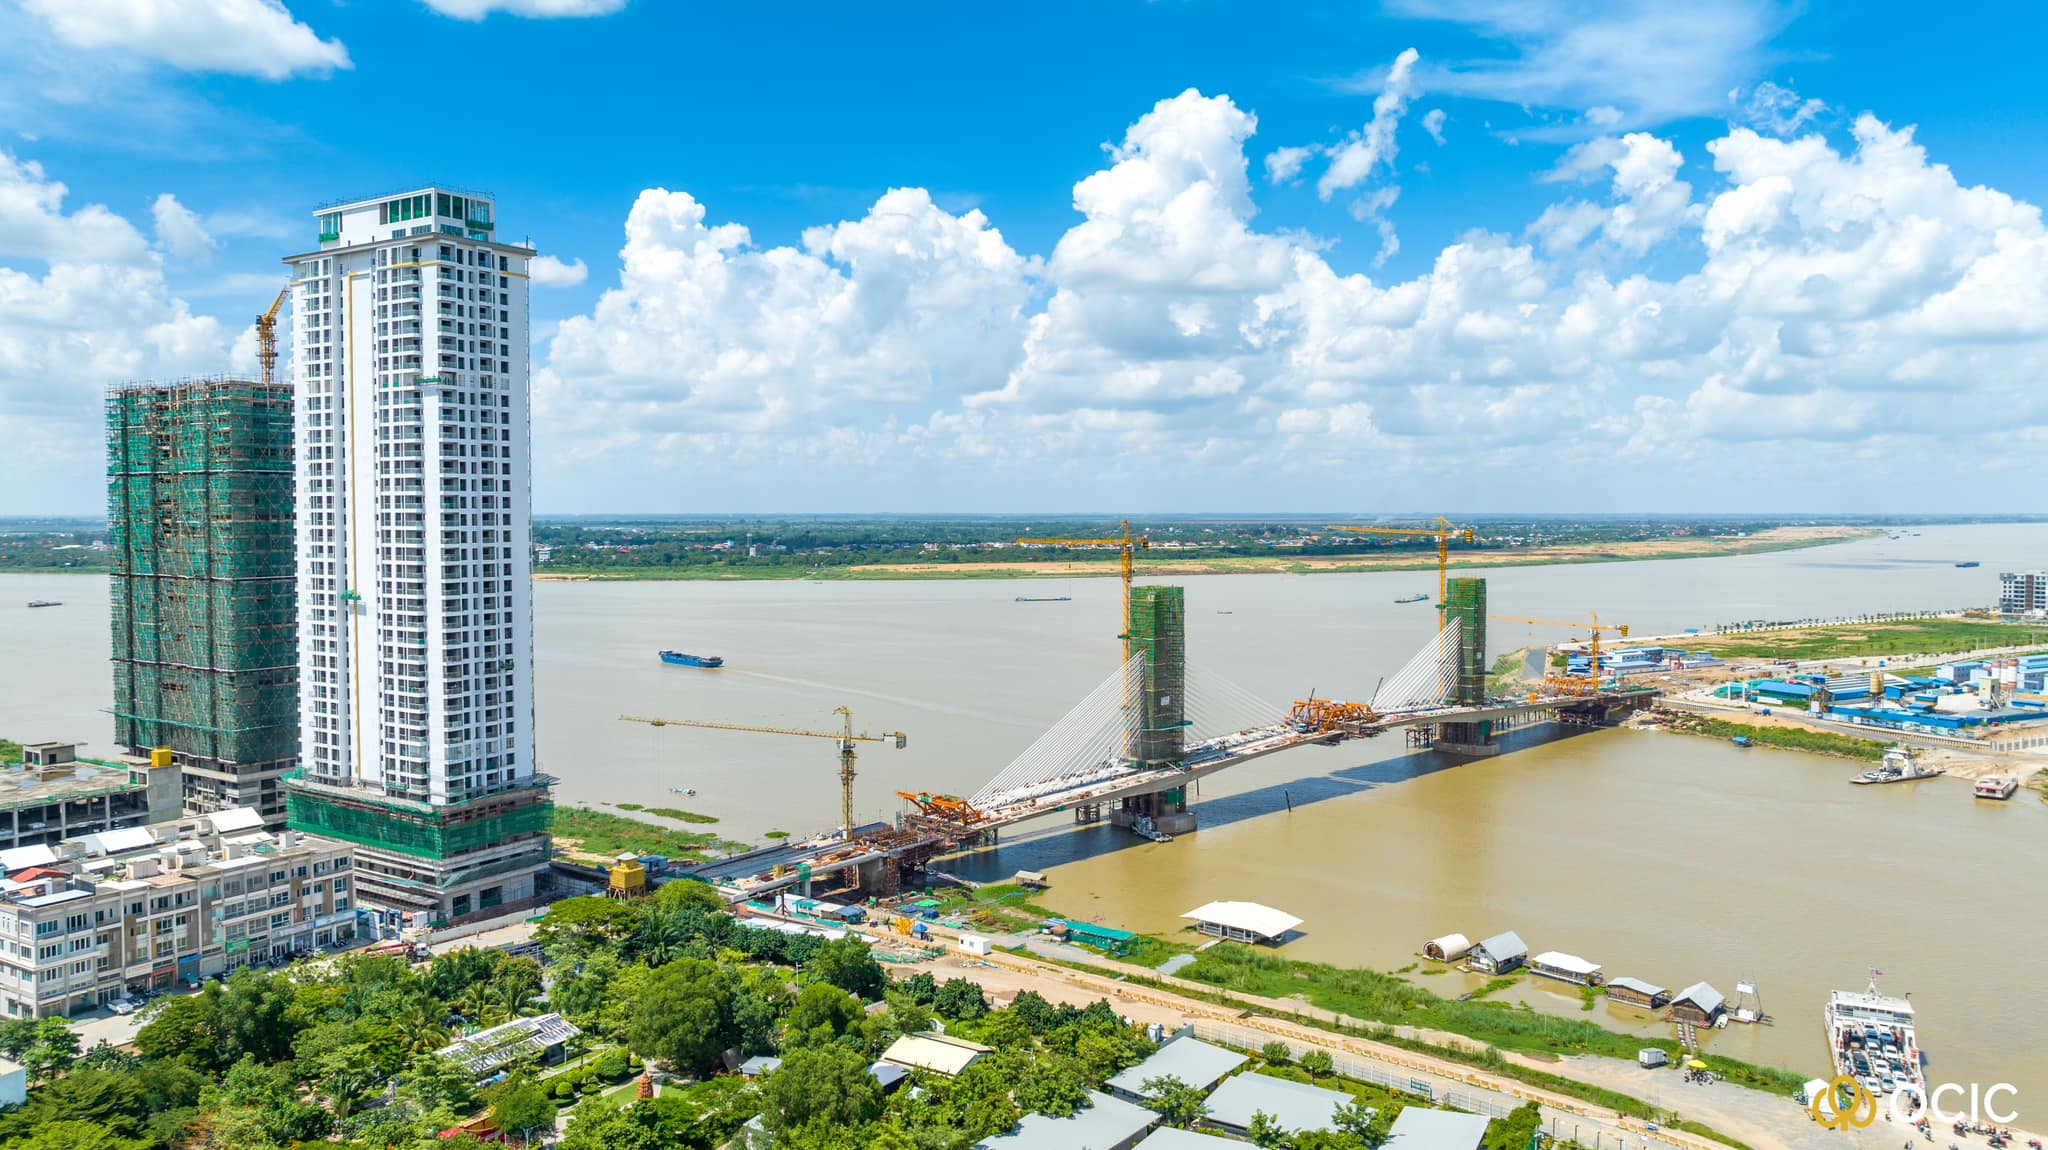 Koh Pich-Koh Norea Cable Bridge to be Connected on September 10 | Harbor Property